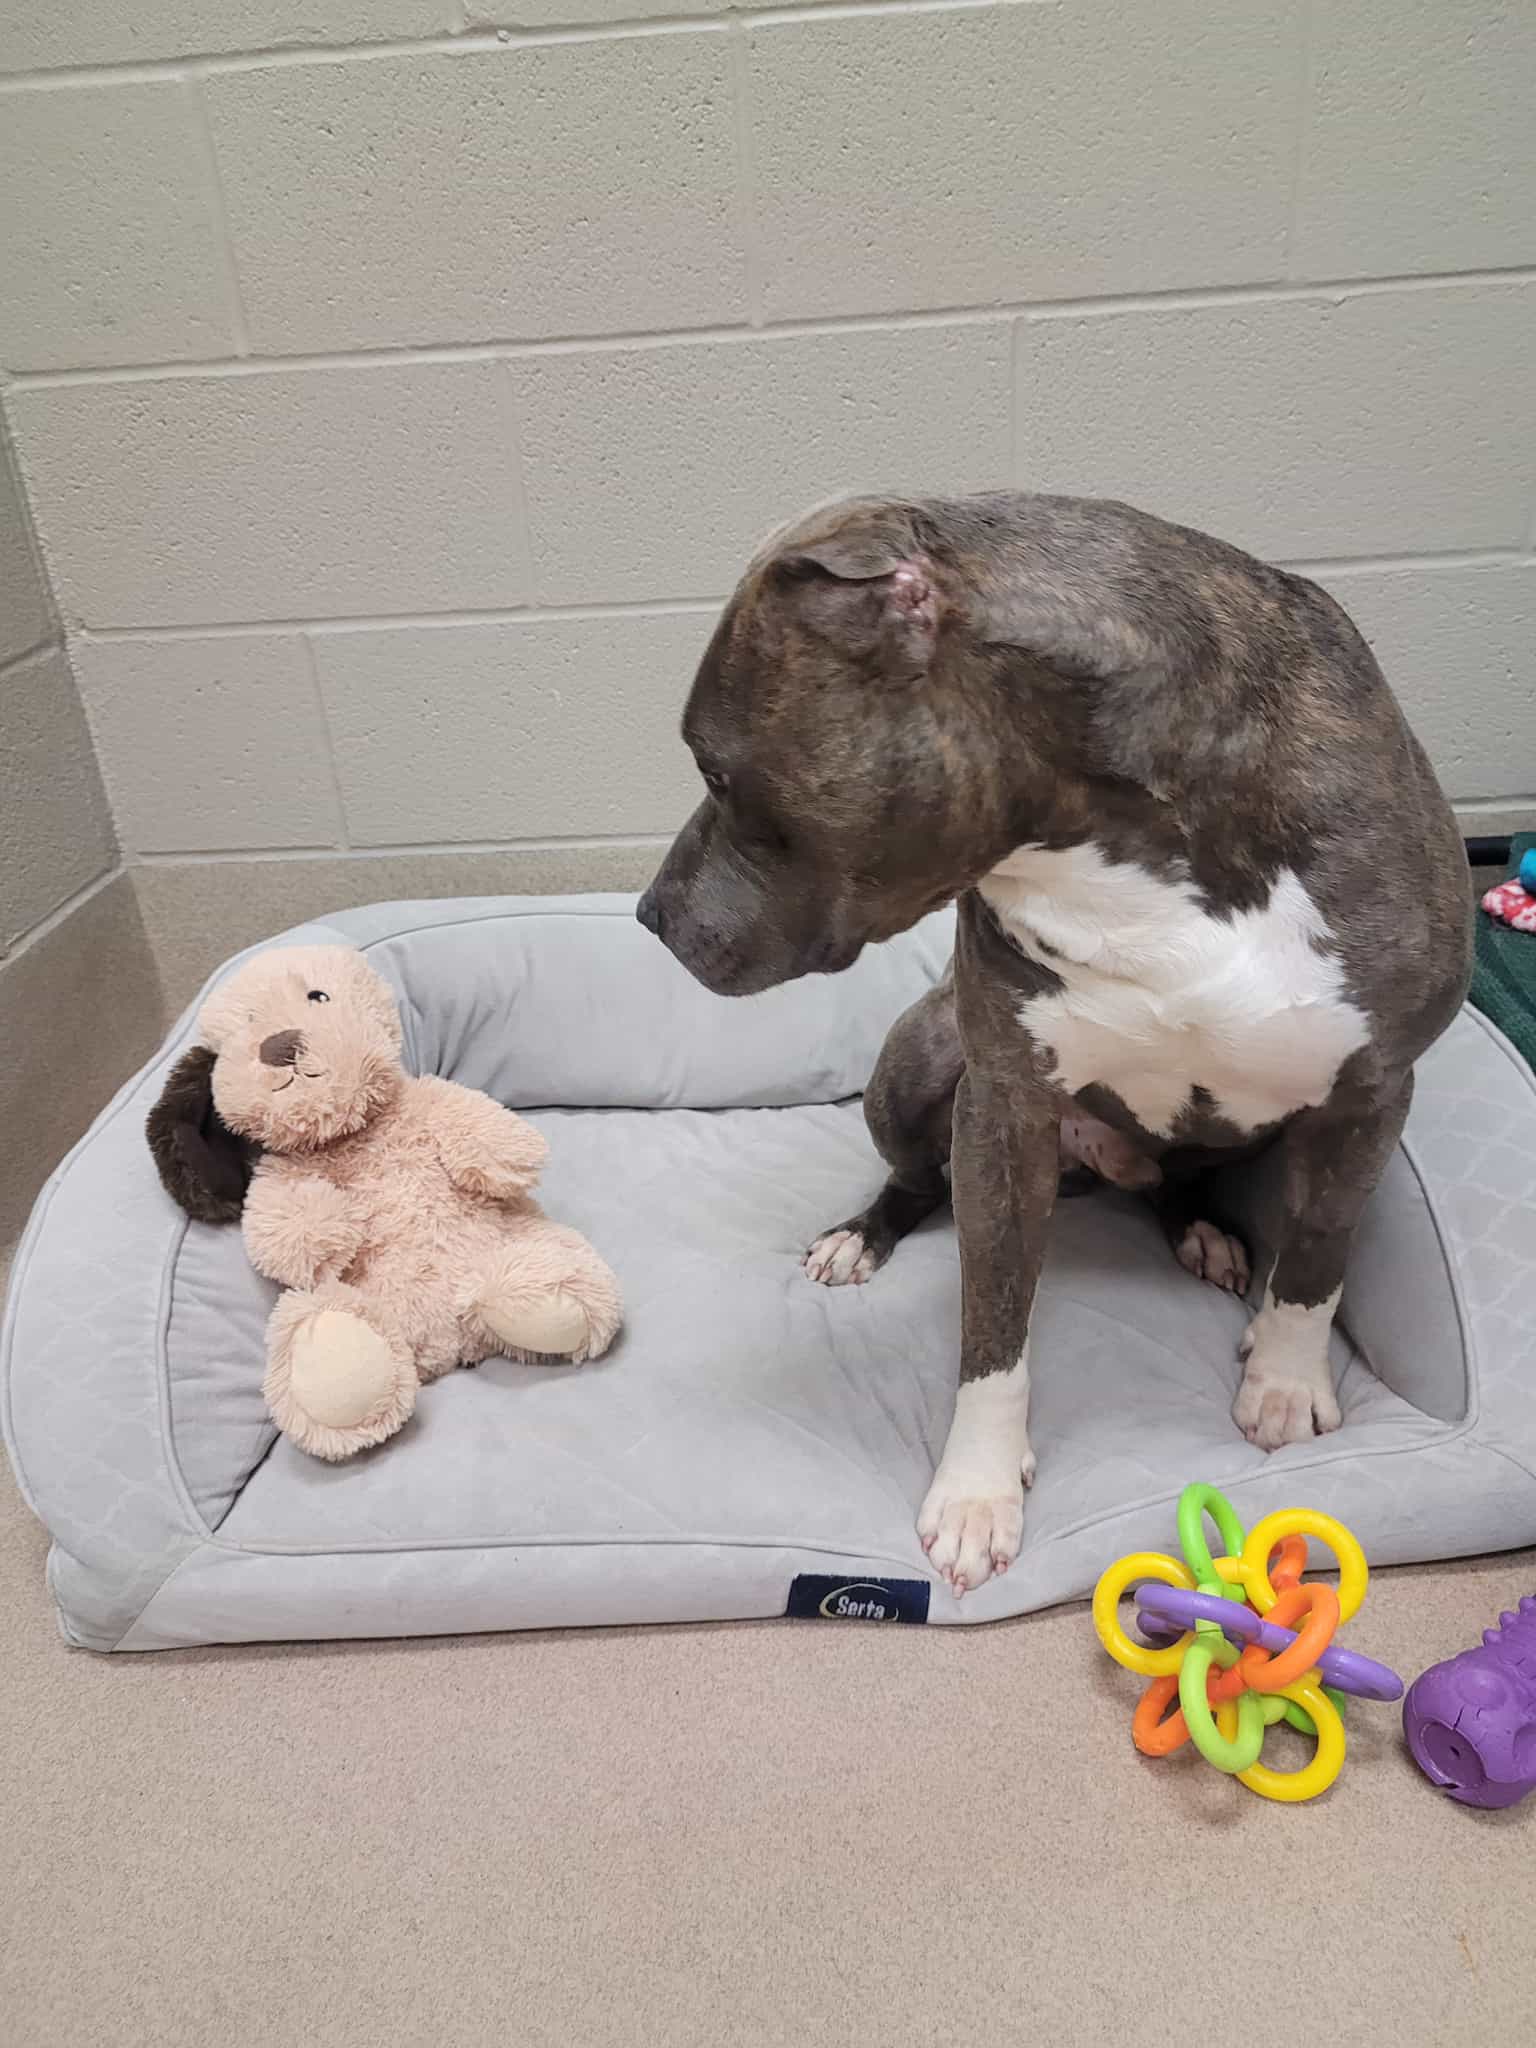 photo of a one-eared pitbull in a shelter